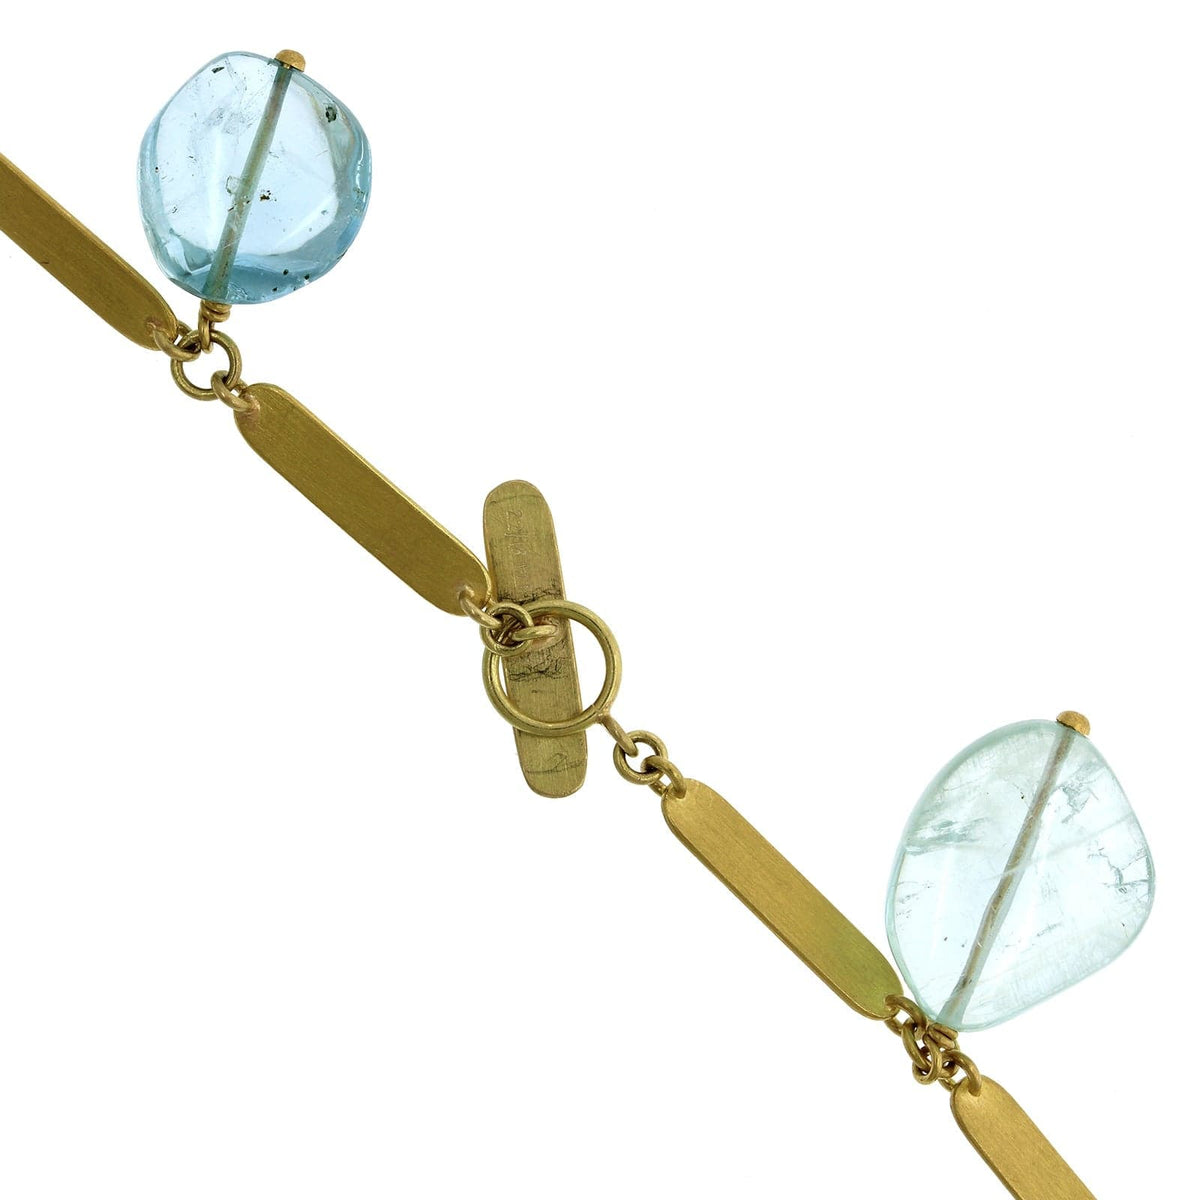 22K and 18K Yellow Gold Aquamarine Bead Dangle Necklace, 22K and 18K Yellow Gold, Long's Jewelers